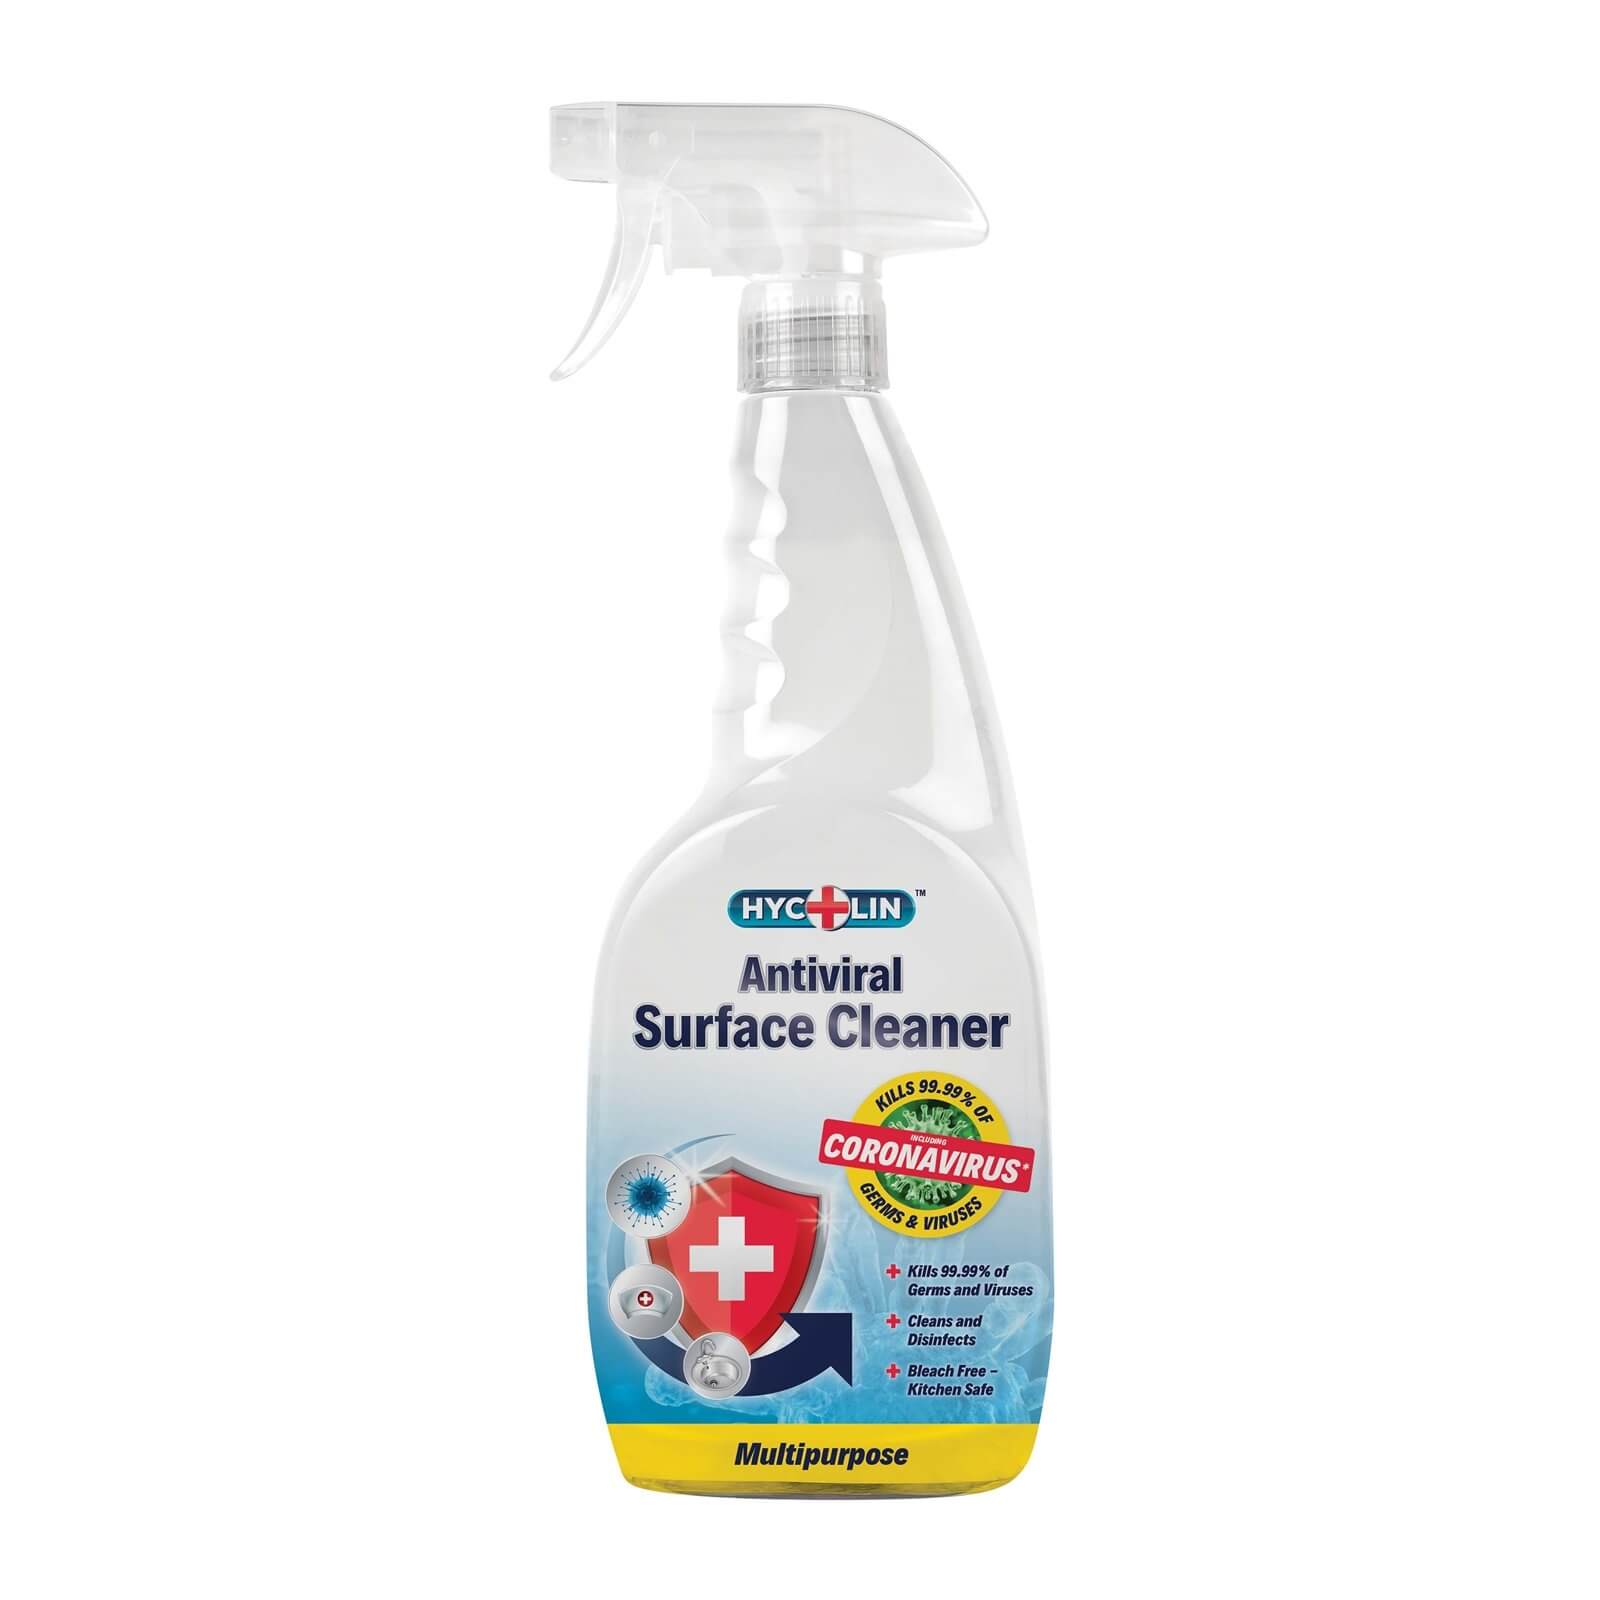 Photo of Hycolin Antiviral Surface Cleaner